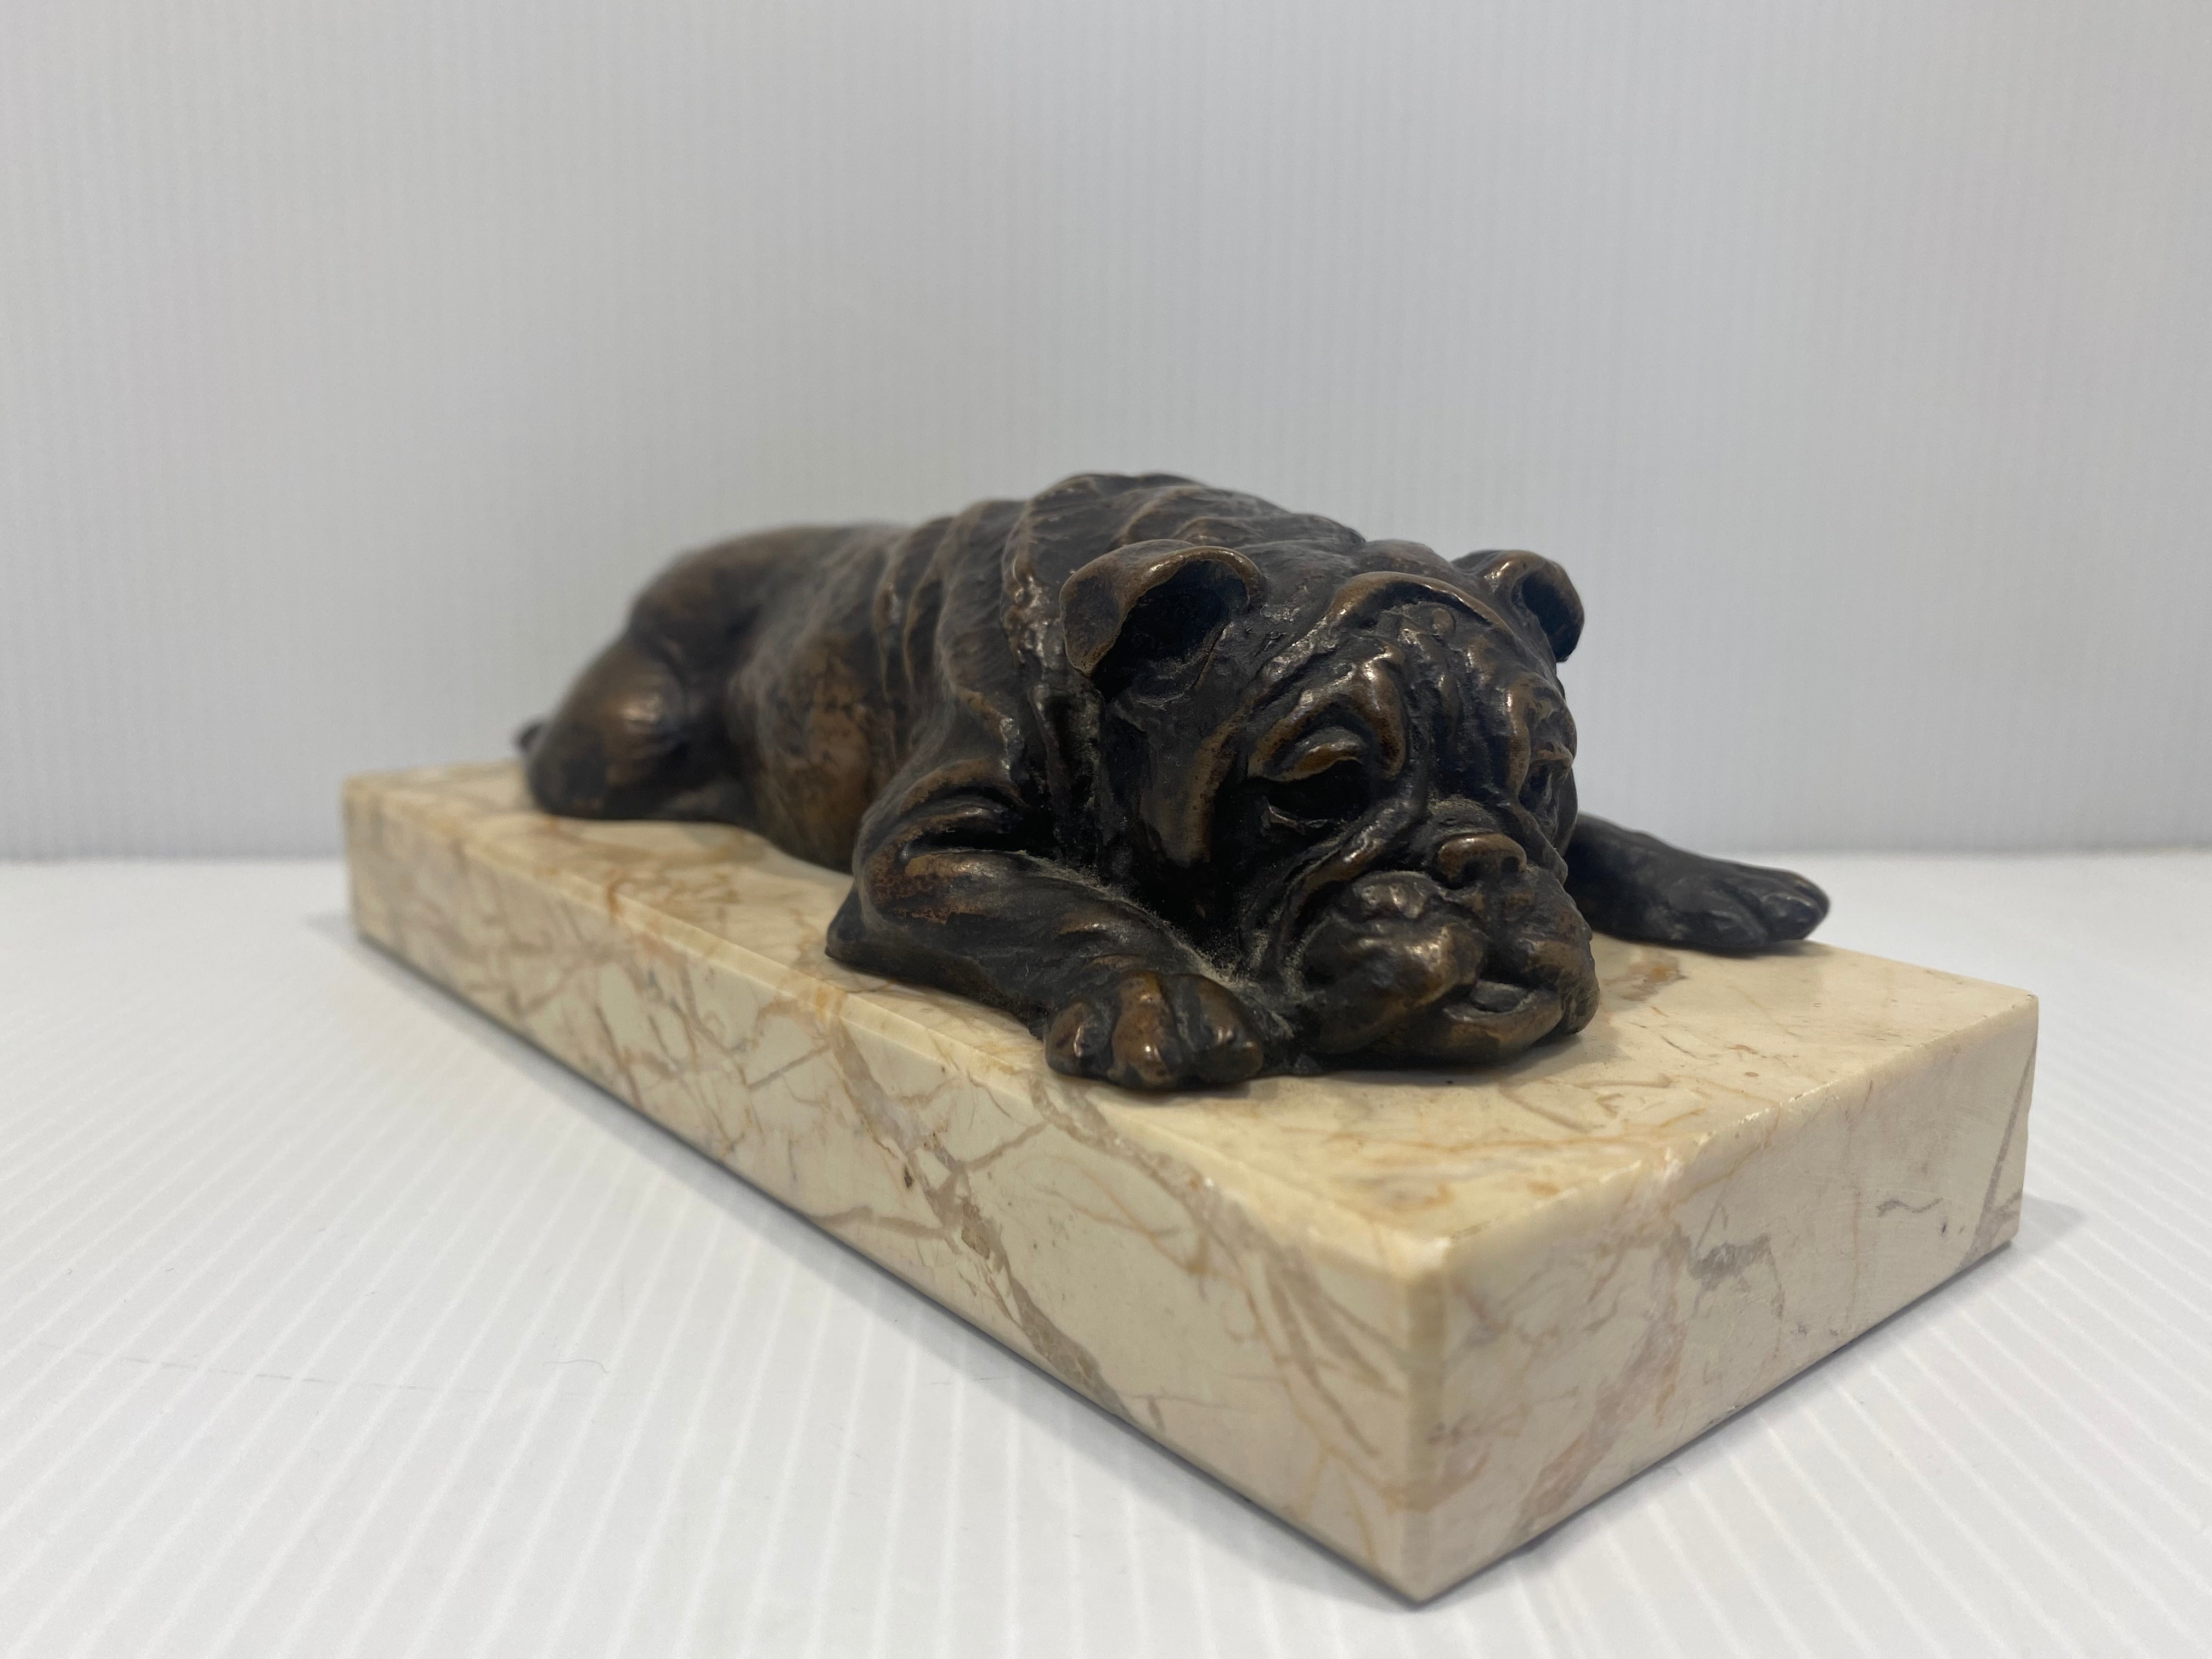 English bulldog bronze sculpture with a marble base